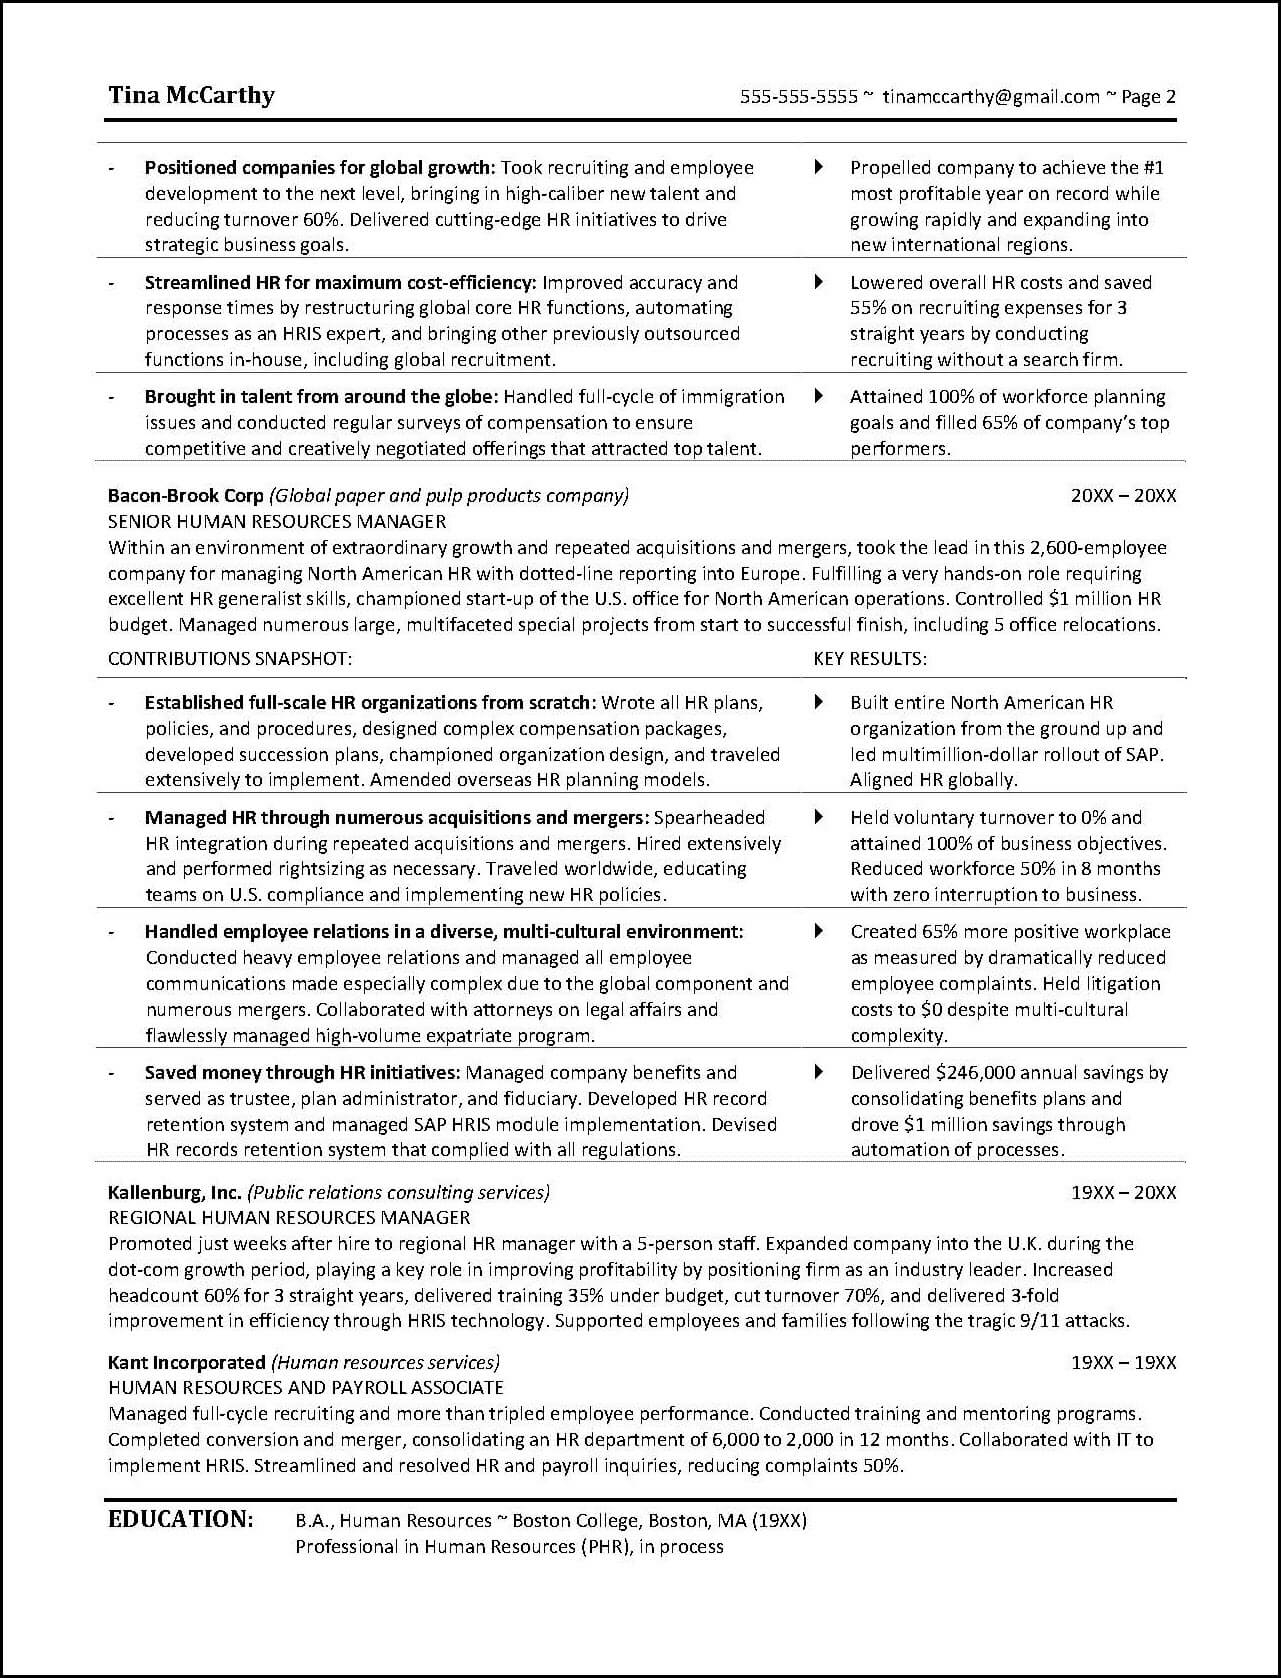 Human Resources Resume Powerful Human Resources Resume Example